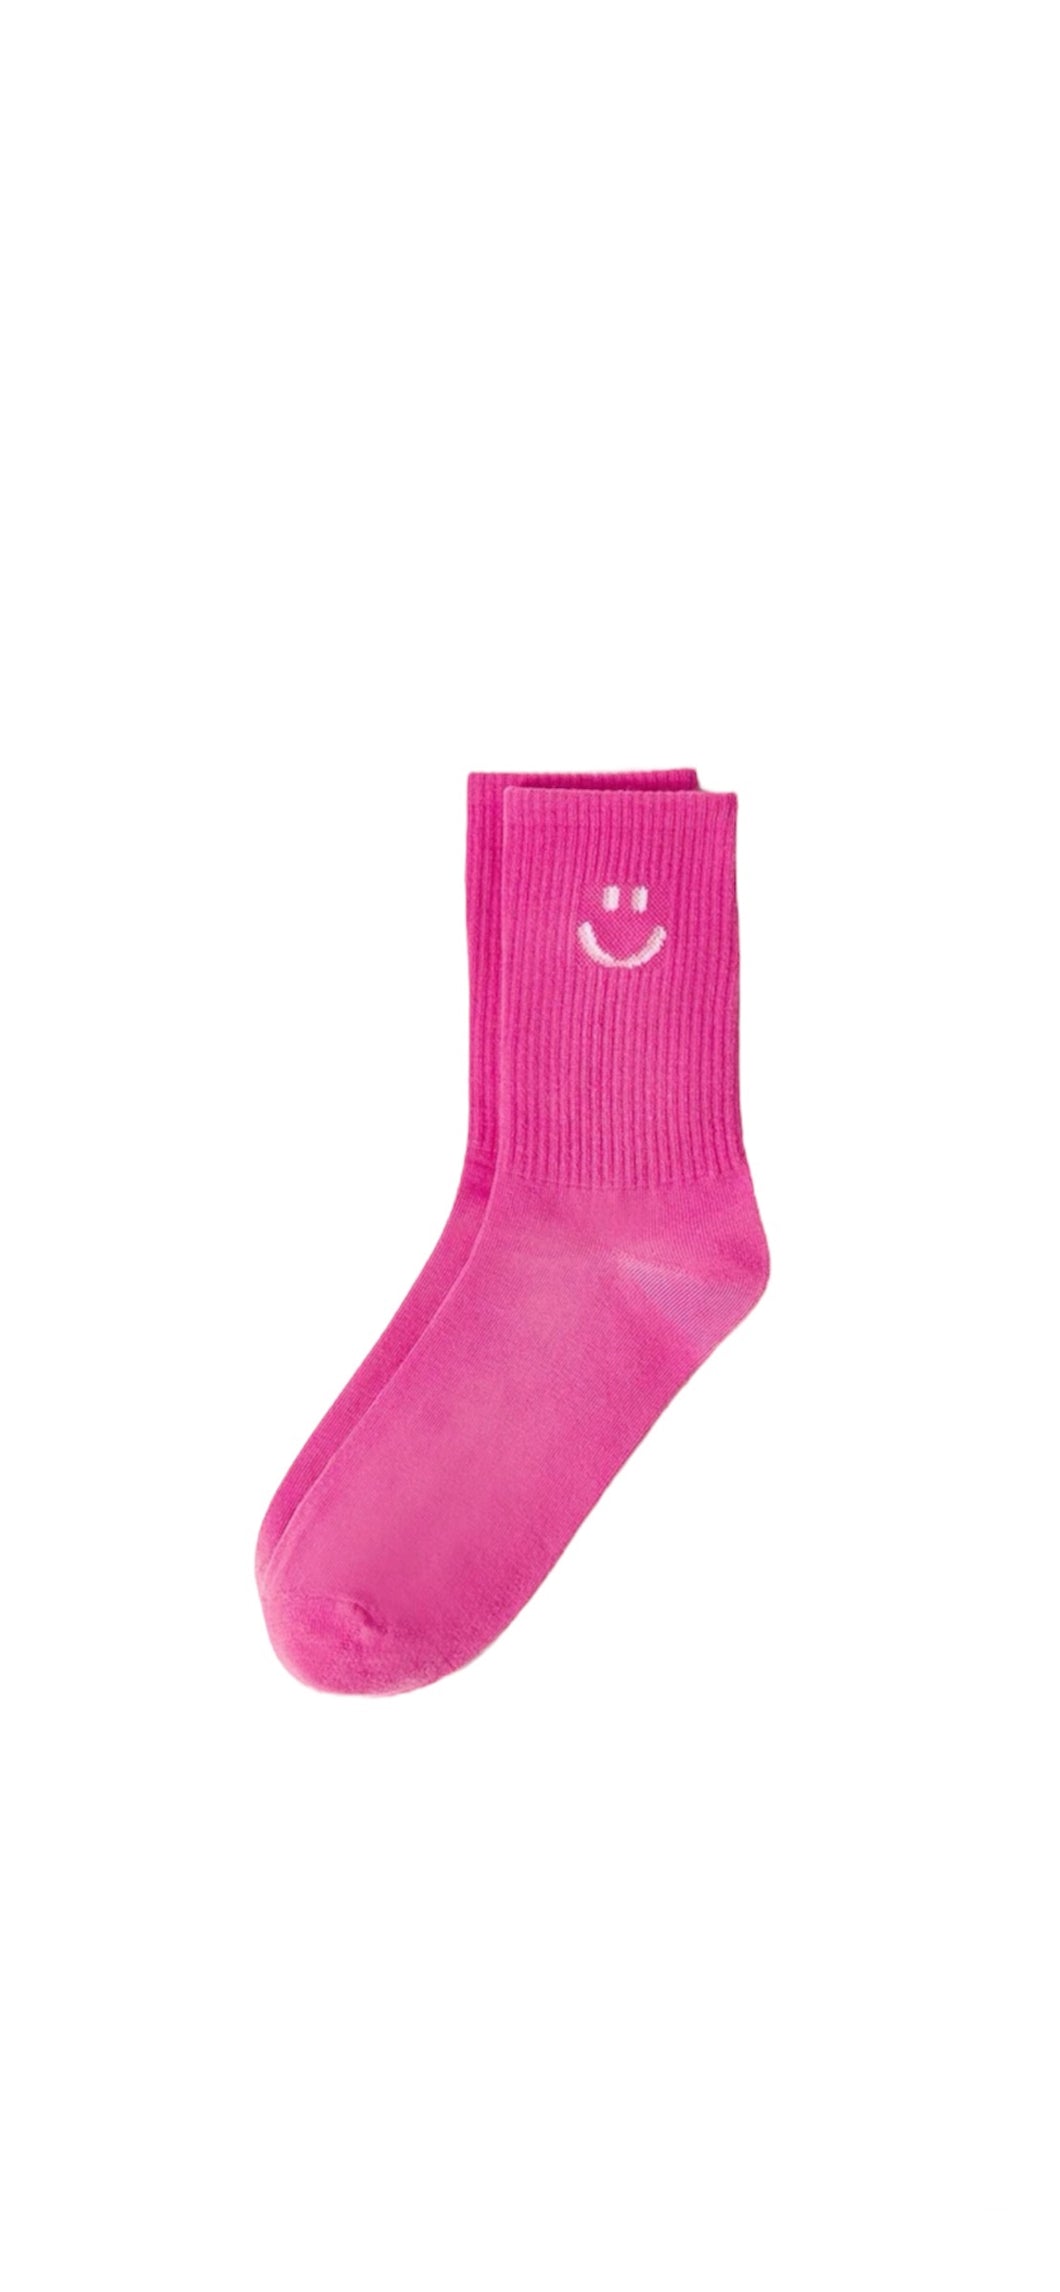 Smiley Socks - Different Colors